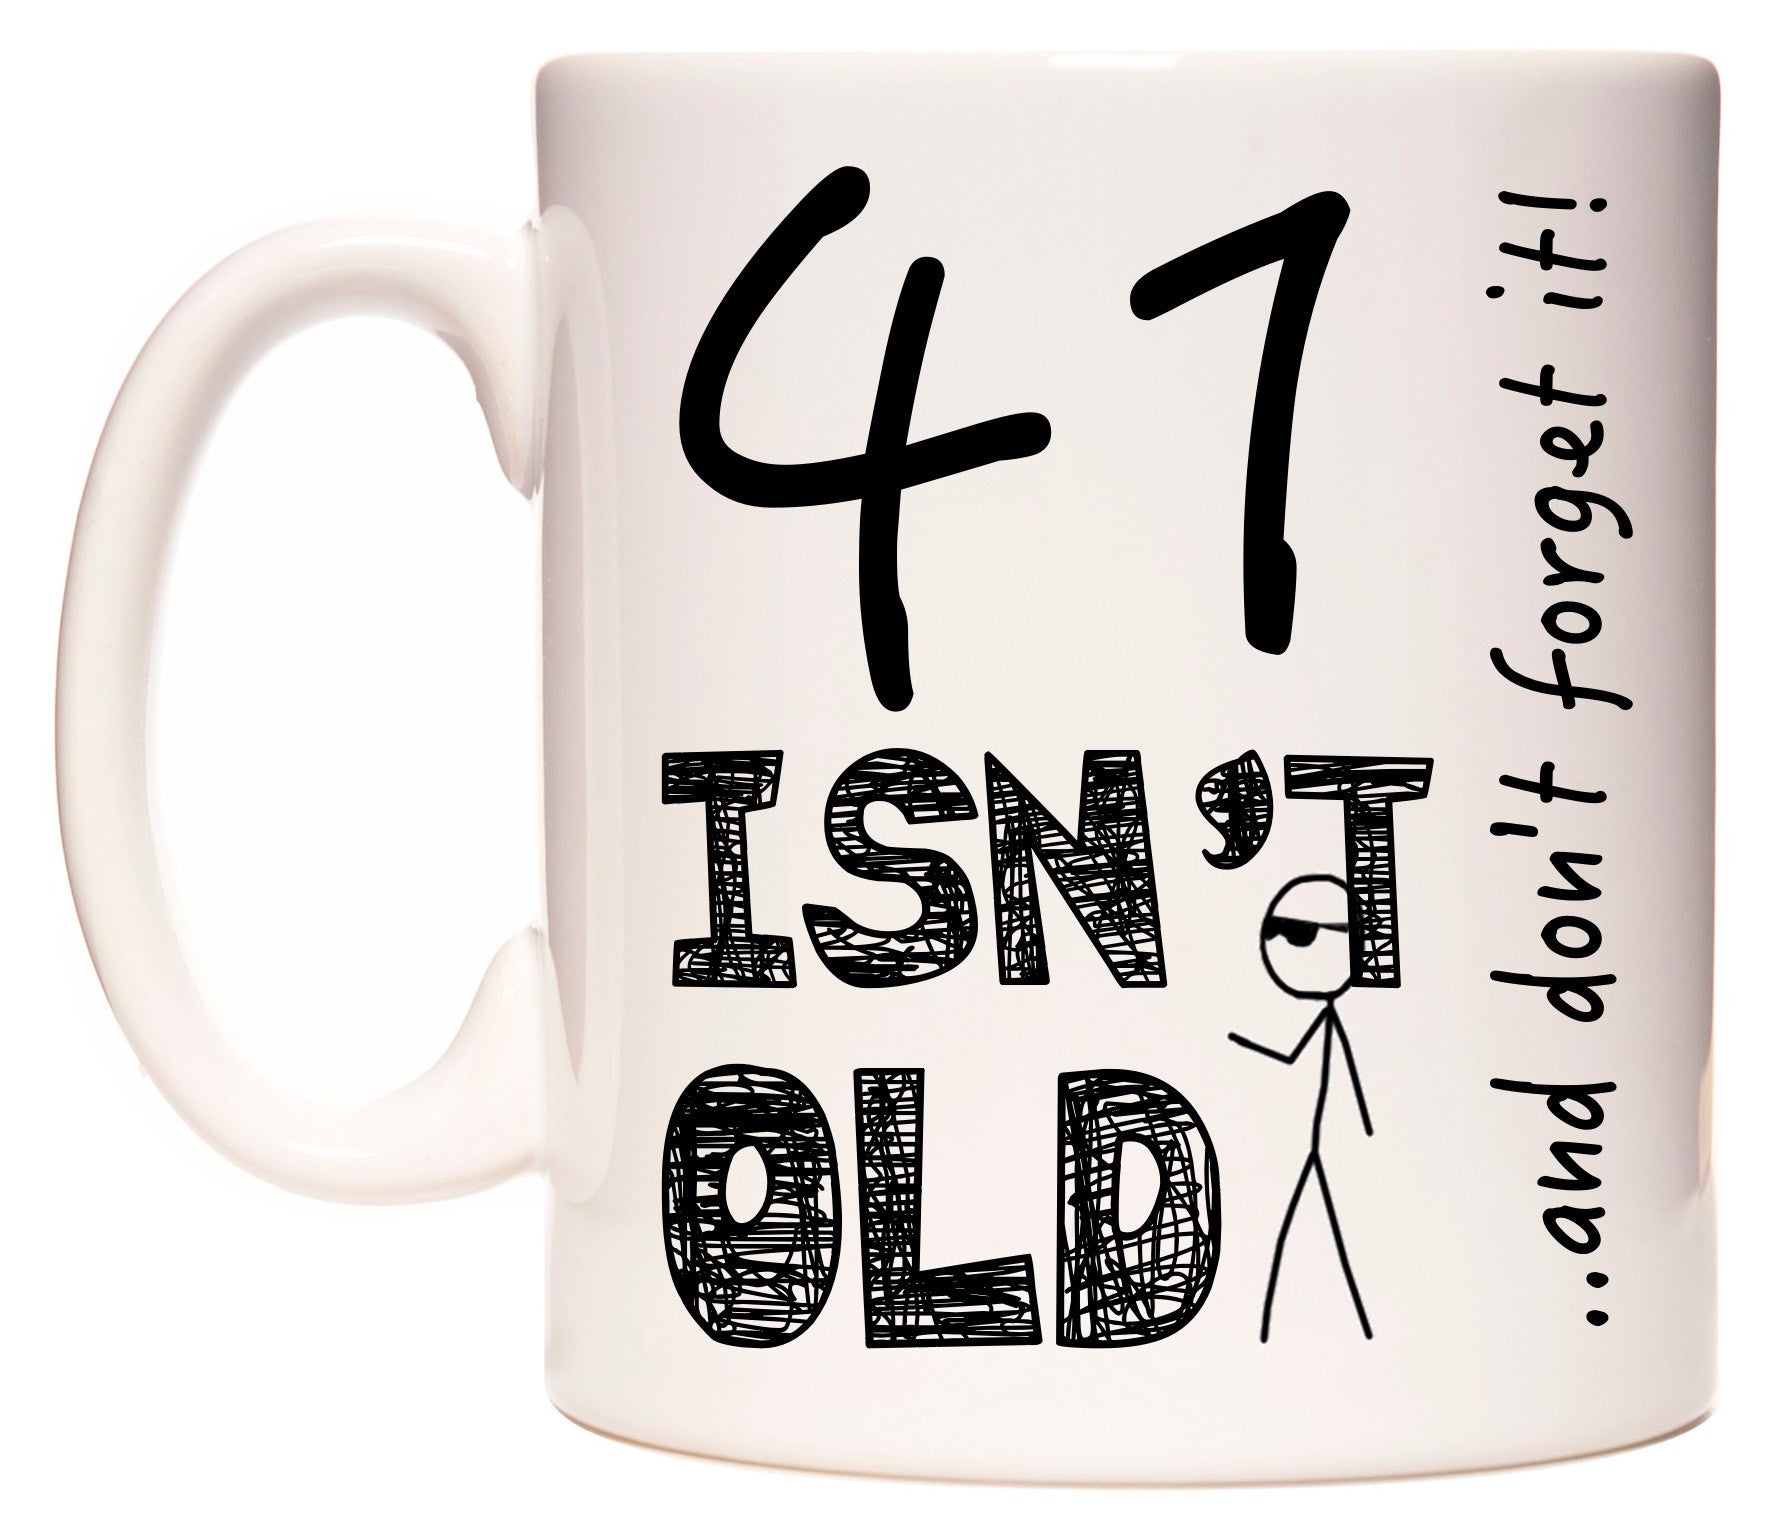 This mug features 41 Isn't Old